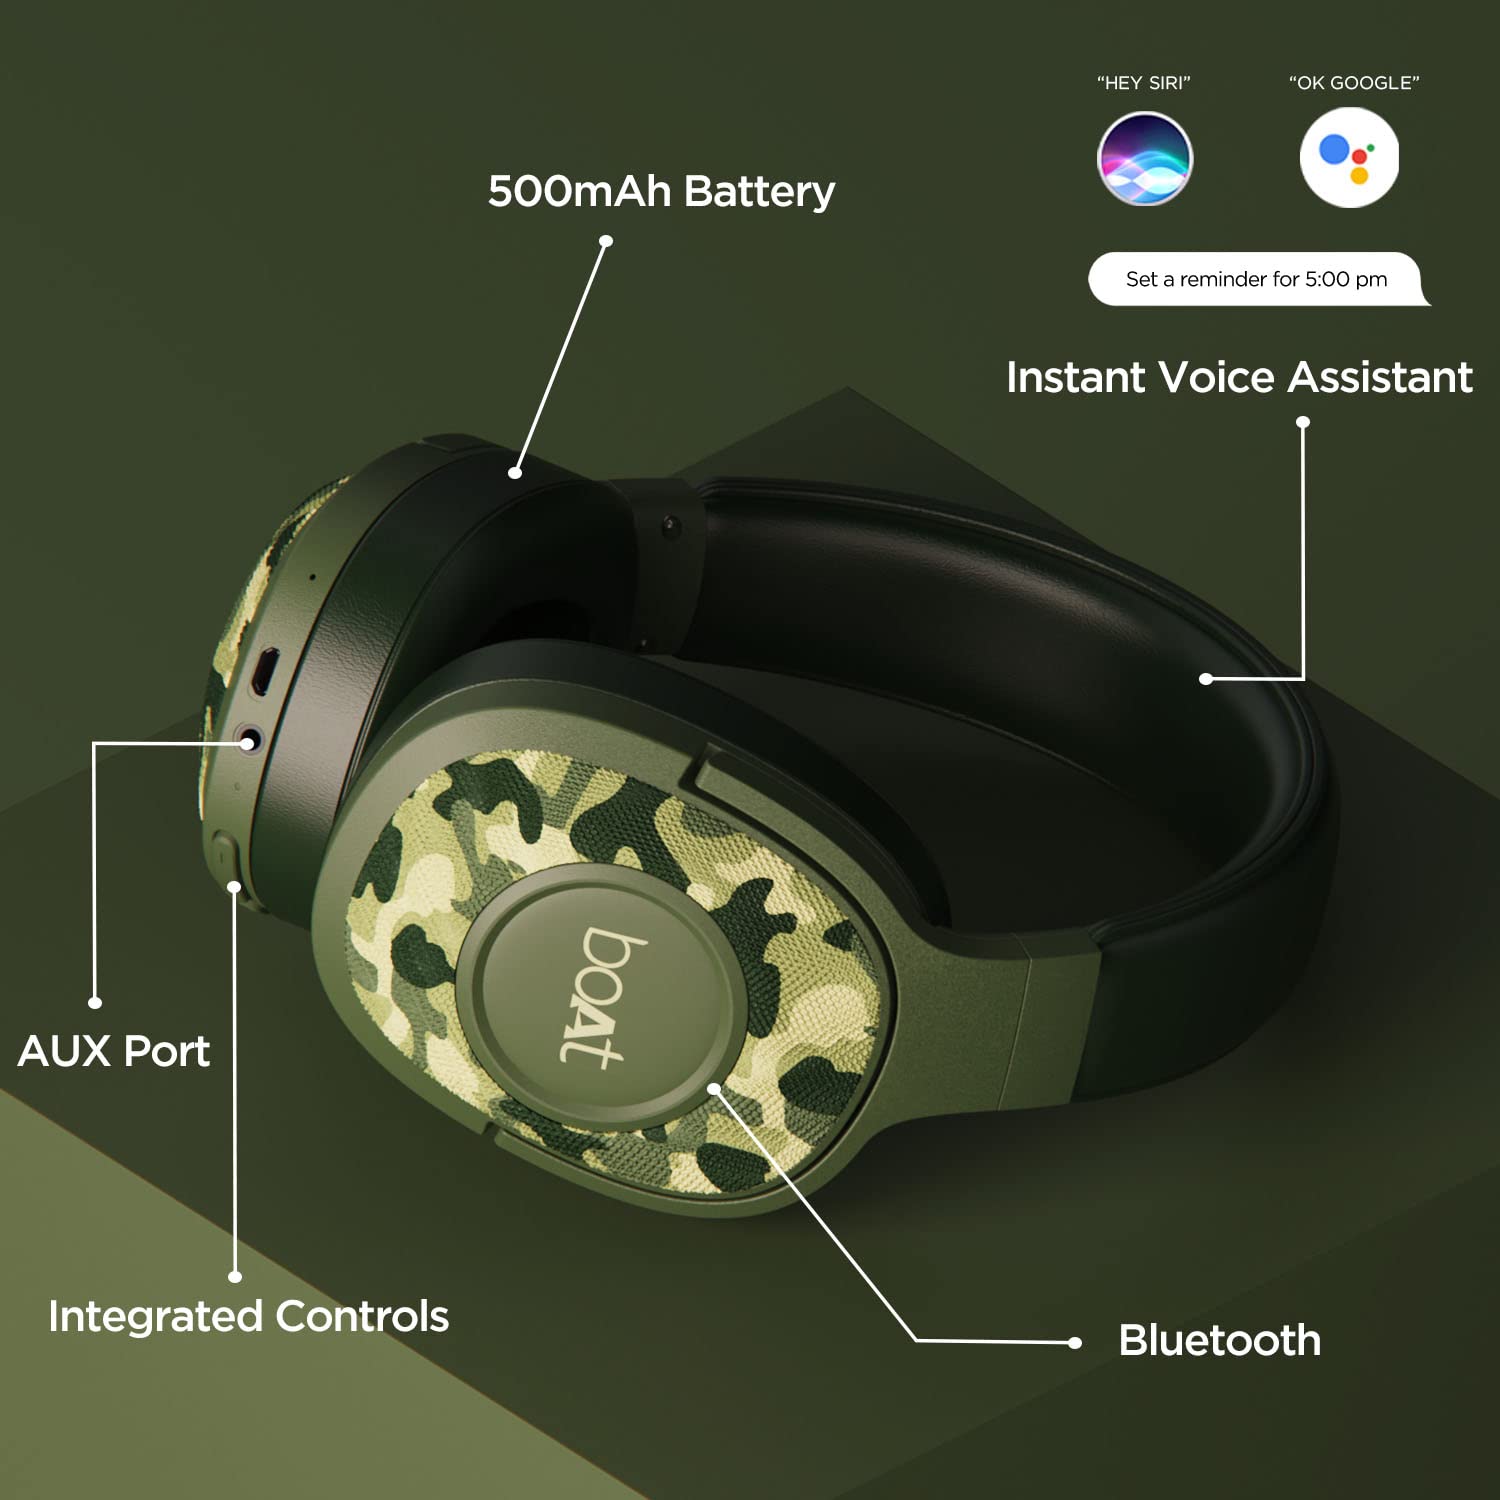 Roll over image to zoom in boAt Rockerz 550 Over Ear Bluetooth Headphones with Upto 20 Hours Playback, 50MM Drivers, Soft Padded Ear Cushions and Physical Noise Isolation, Without Mic (Army Green)